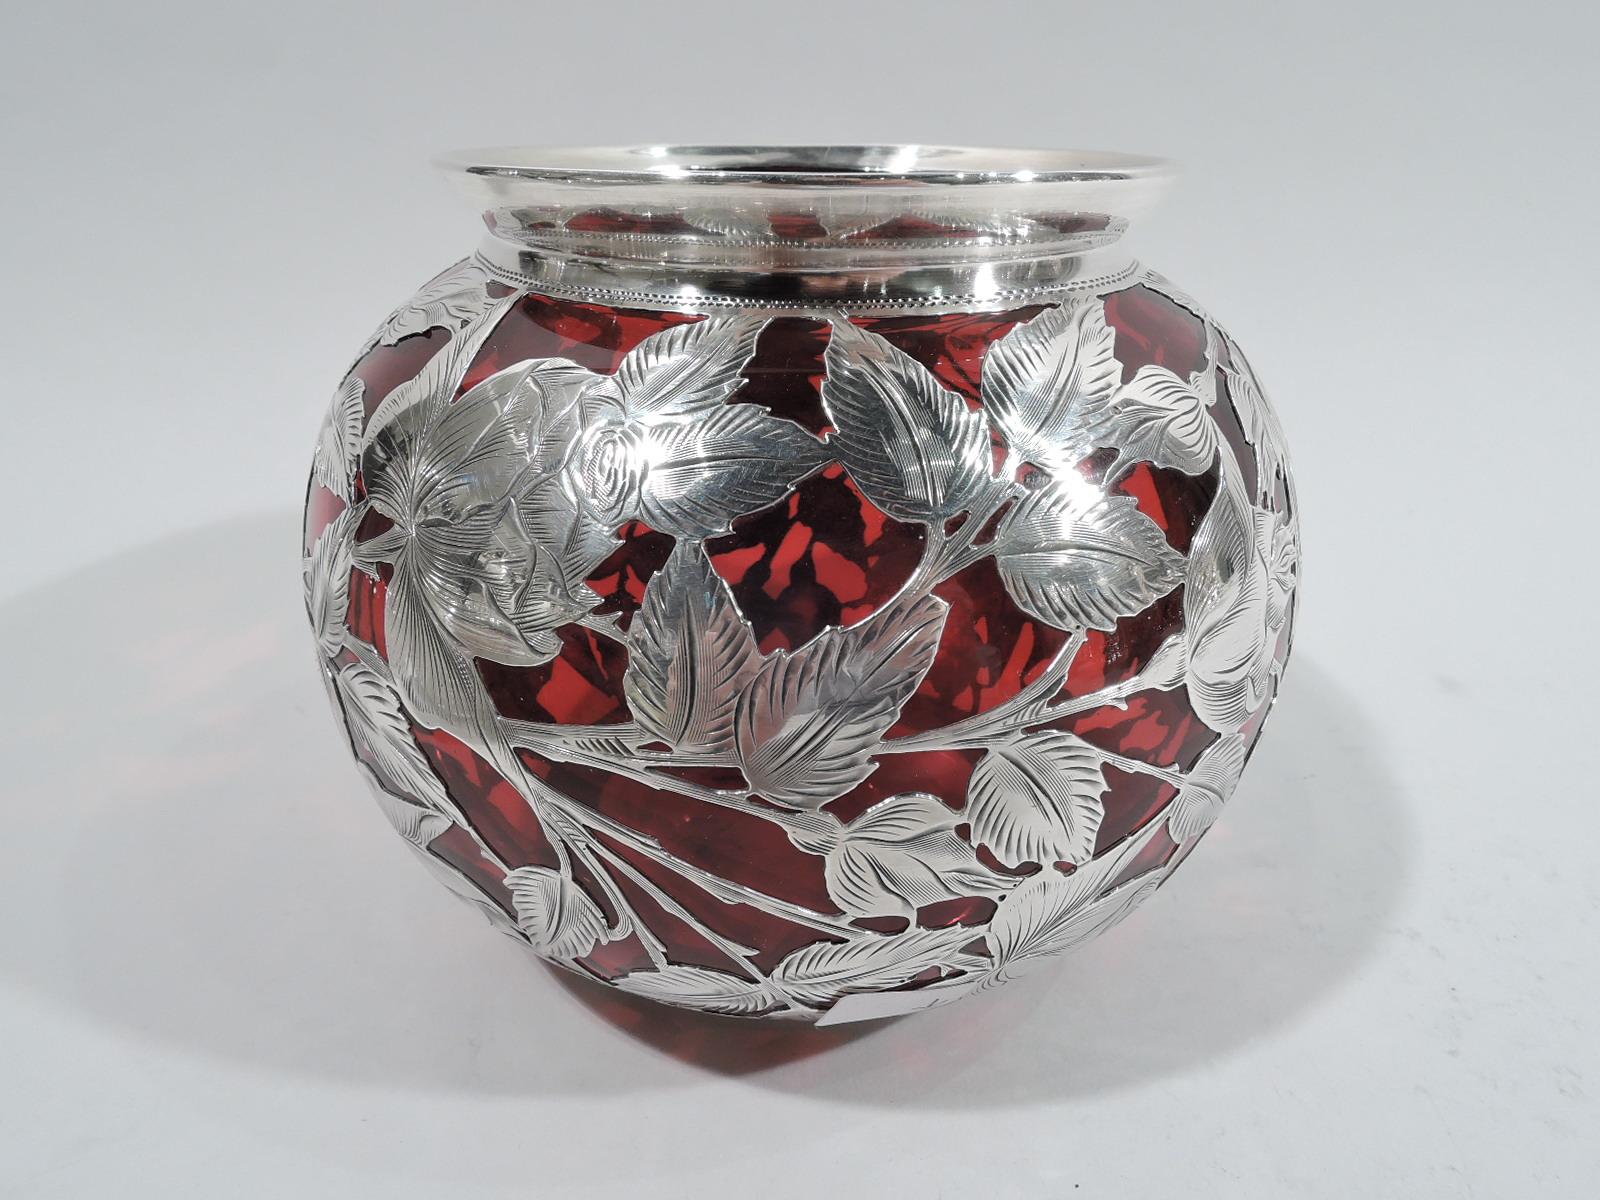 Turn-of-the-century Art Nouveau glass bowl with engraved silver overlay. Made by Alvin in Providence. Globular with flared rim in silver collar. Overlay in form of flowering rose branches. Round shaped and scrolled cartouche (vacant). Glass is red.